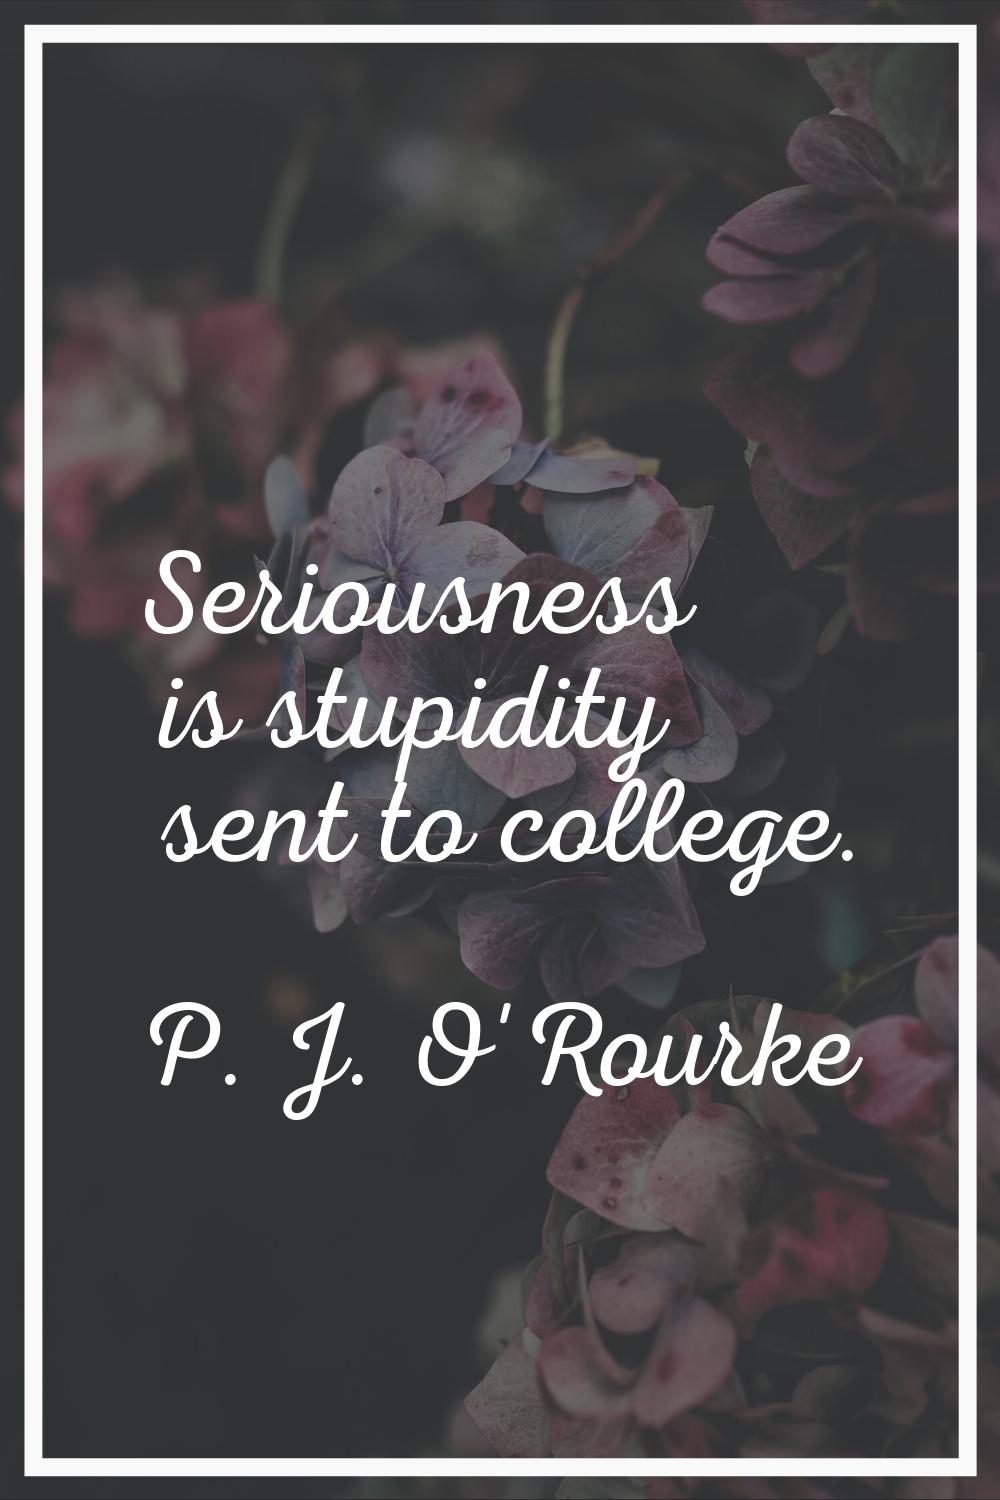 Seriousness is stupidity sent to college.